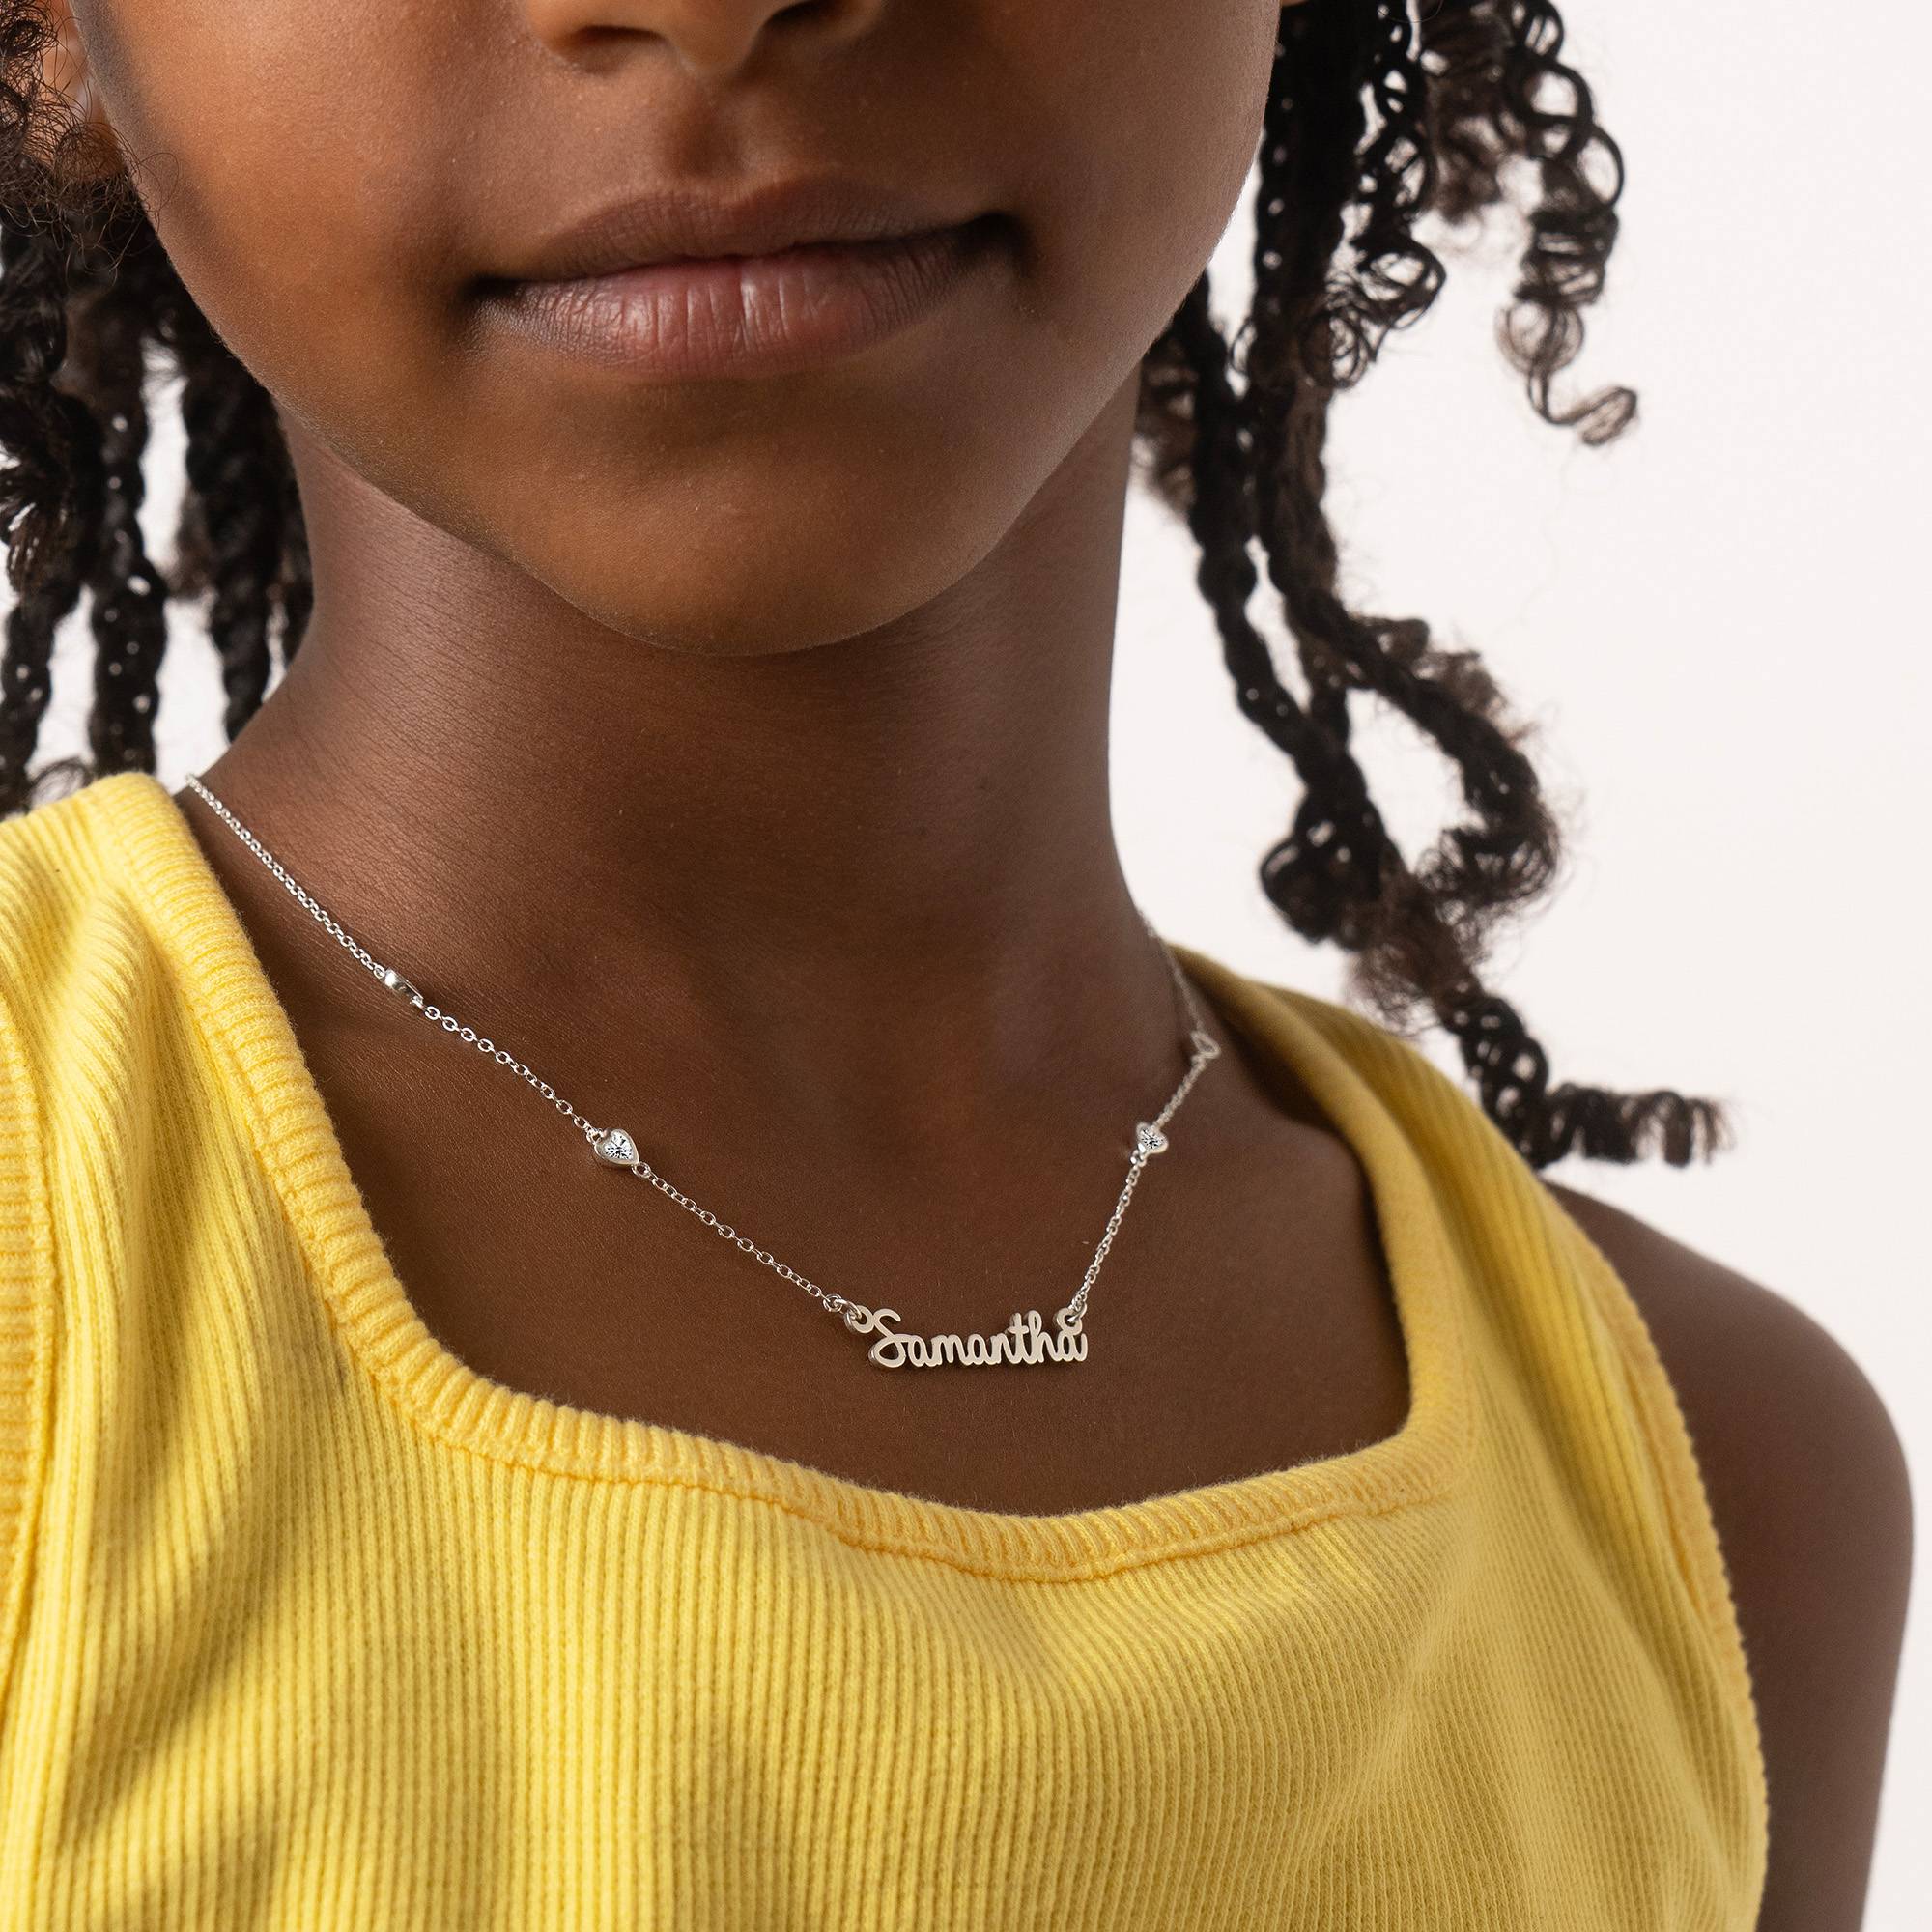 Charli Heart Chain Girls Name Necklace in Sterling Silver-5 product photo